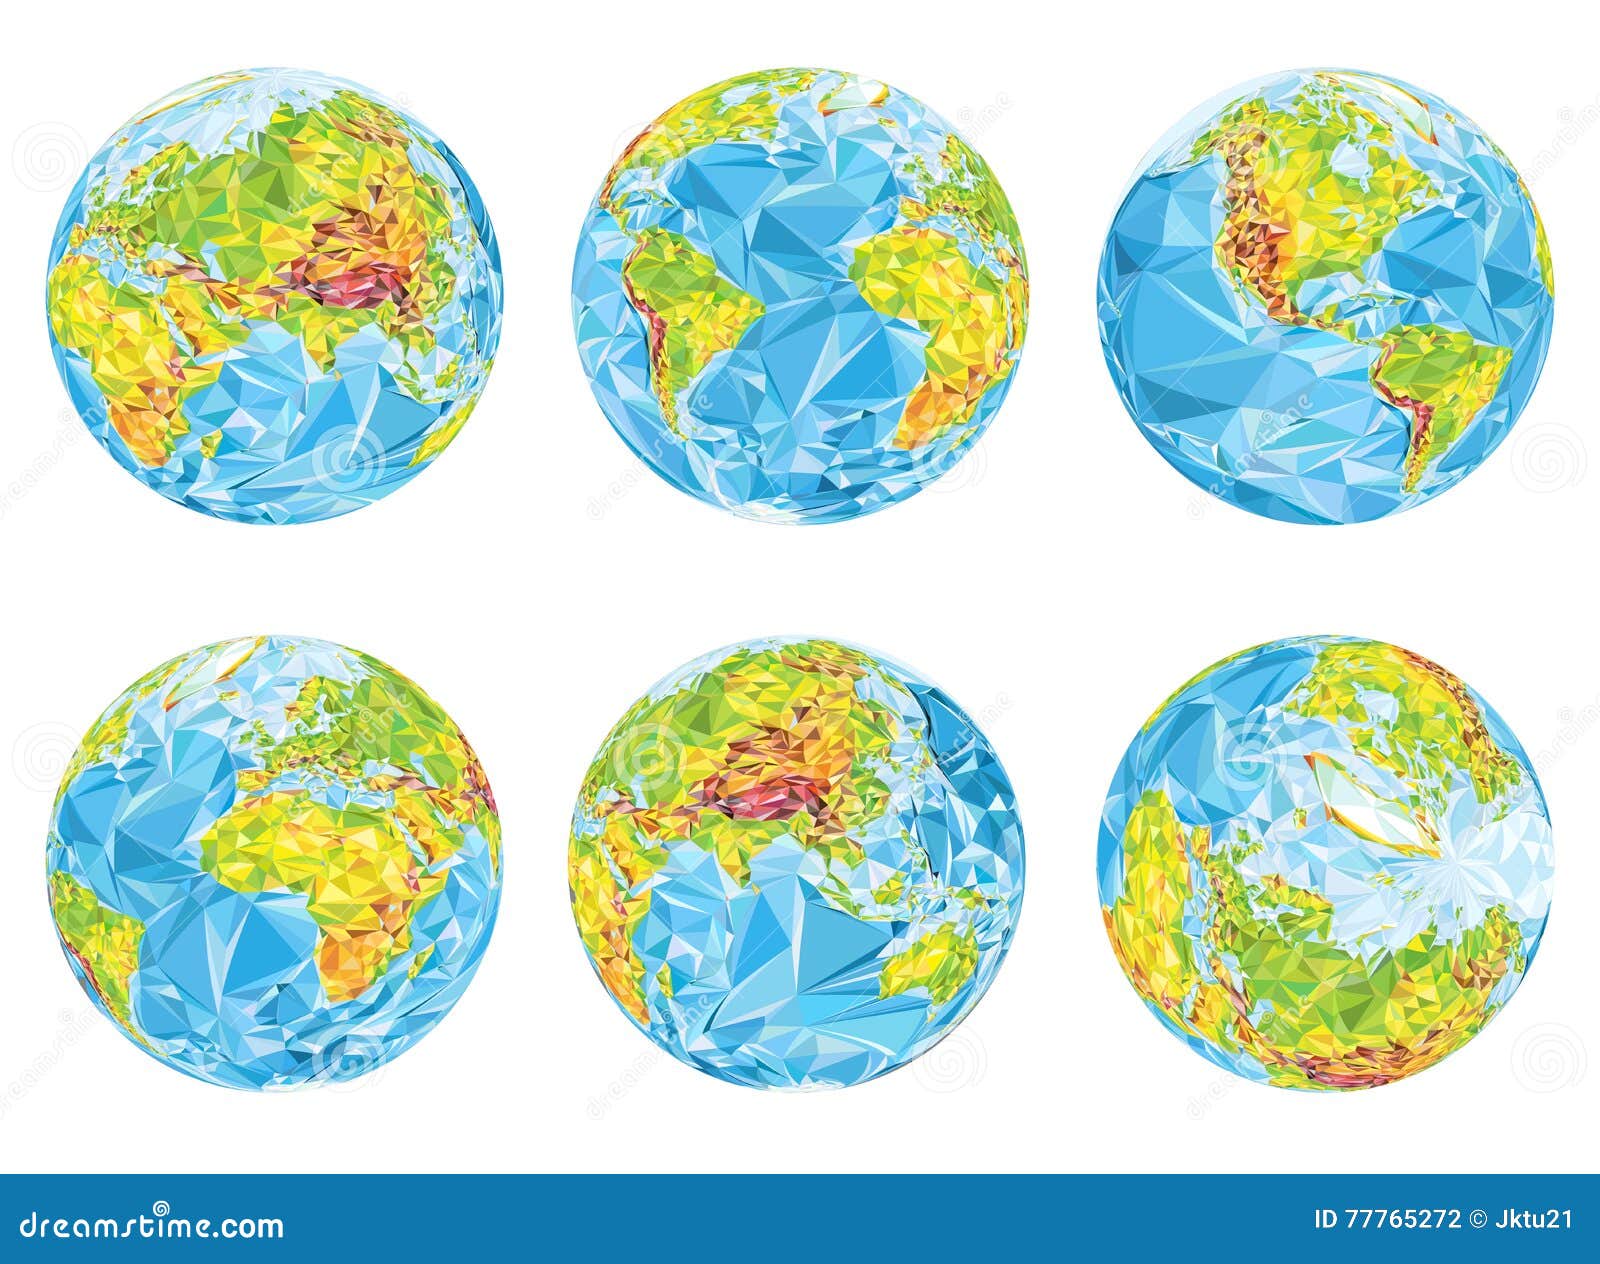 earth geographical globes in different positions